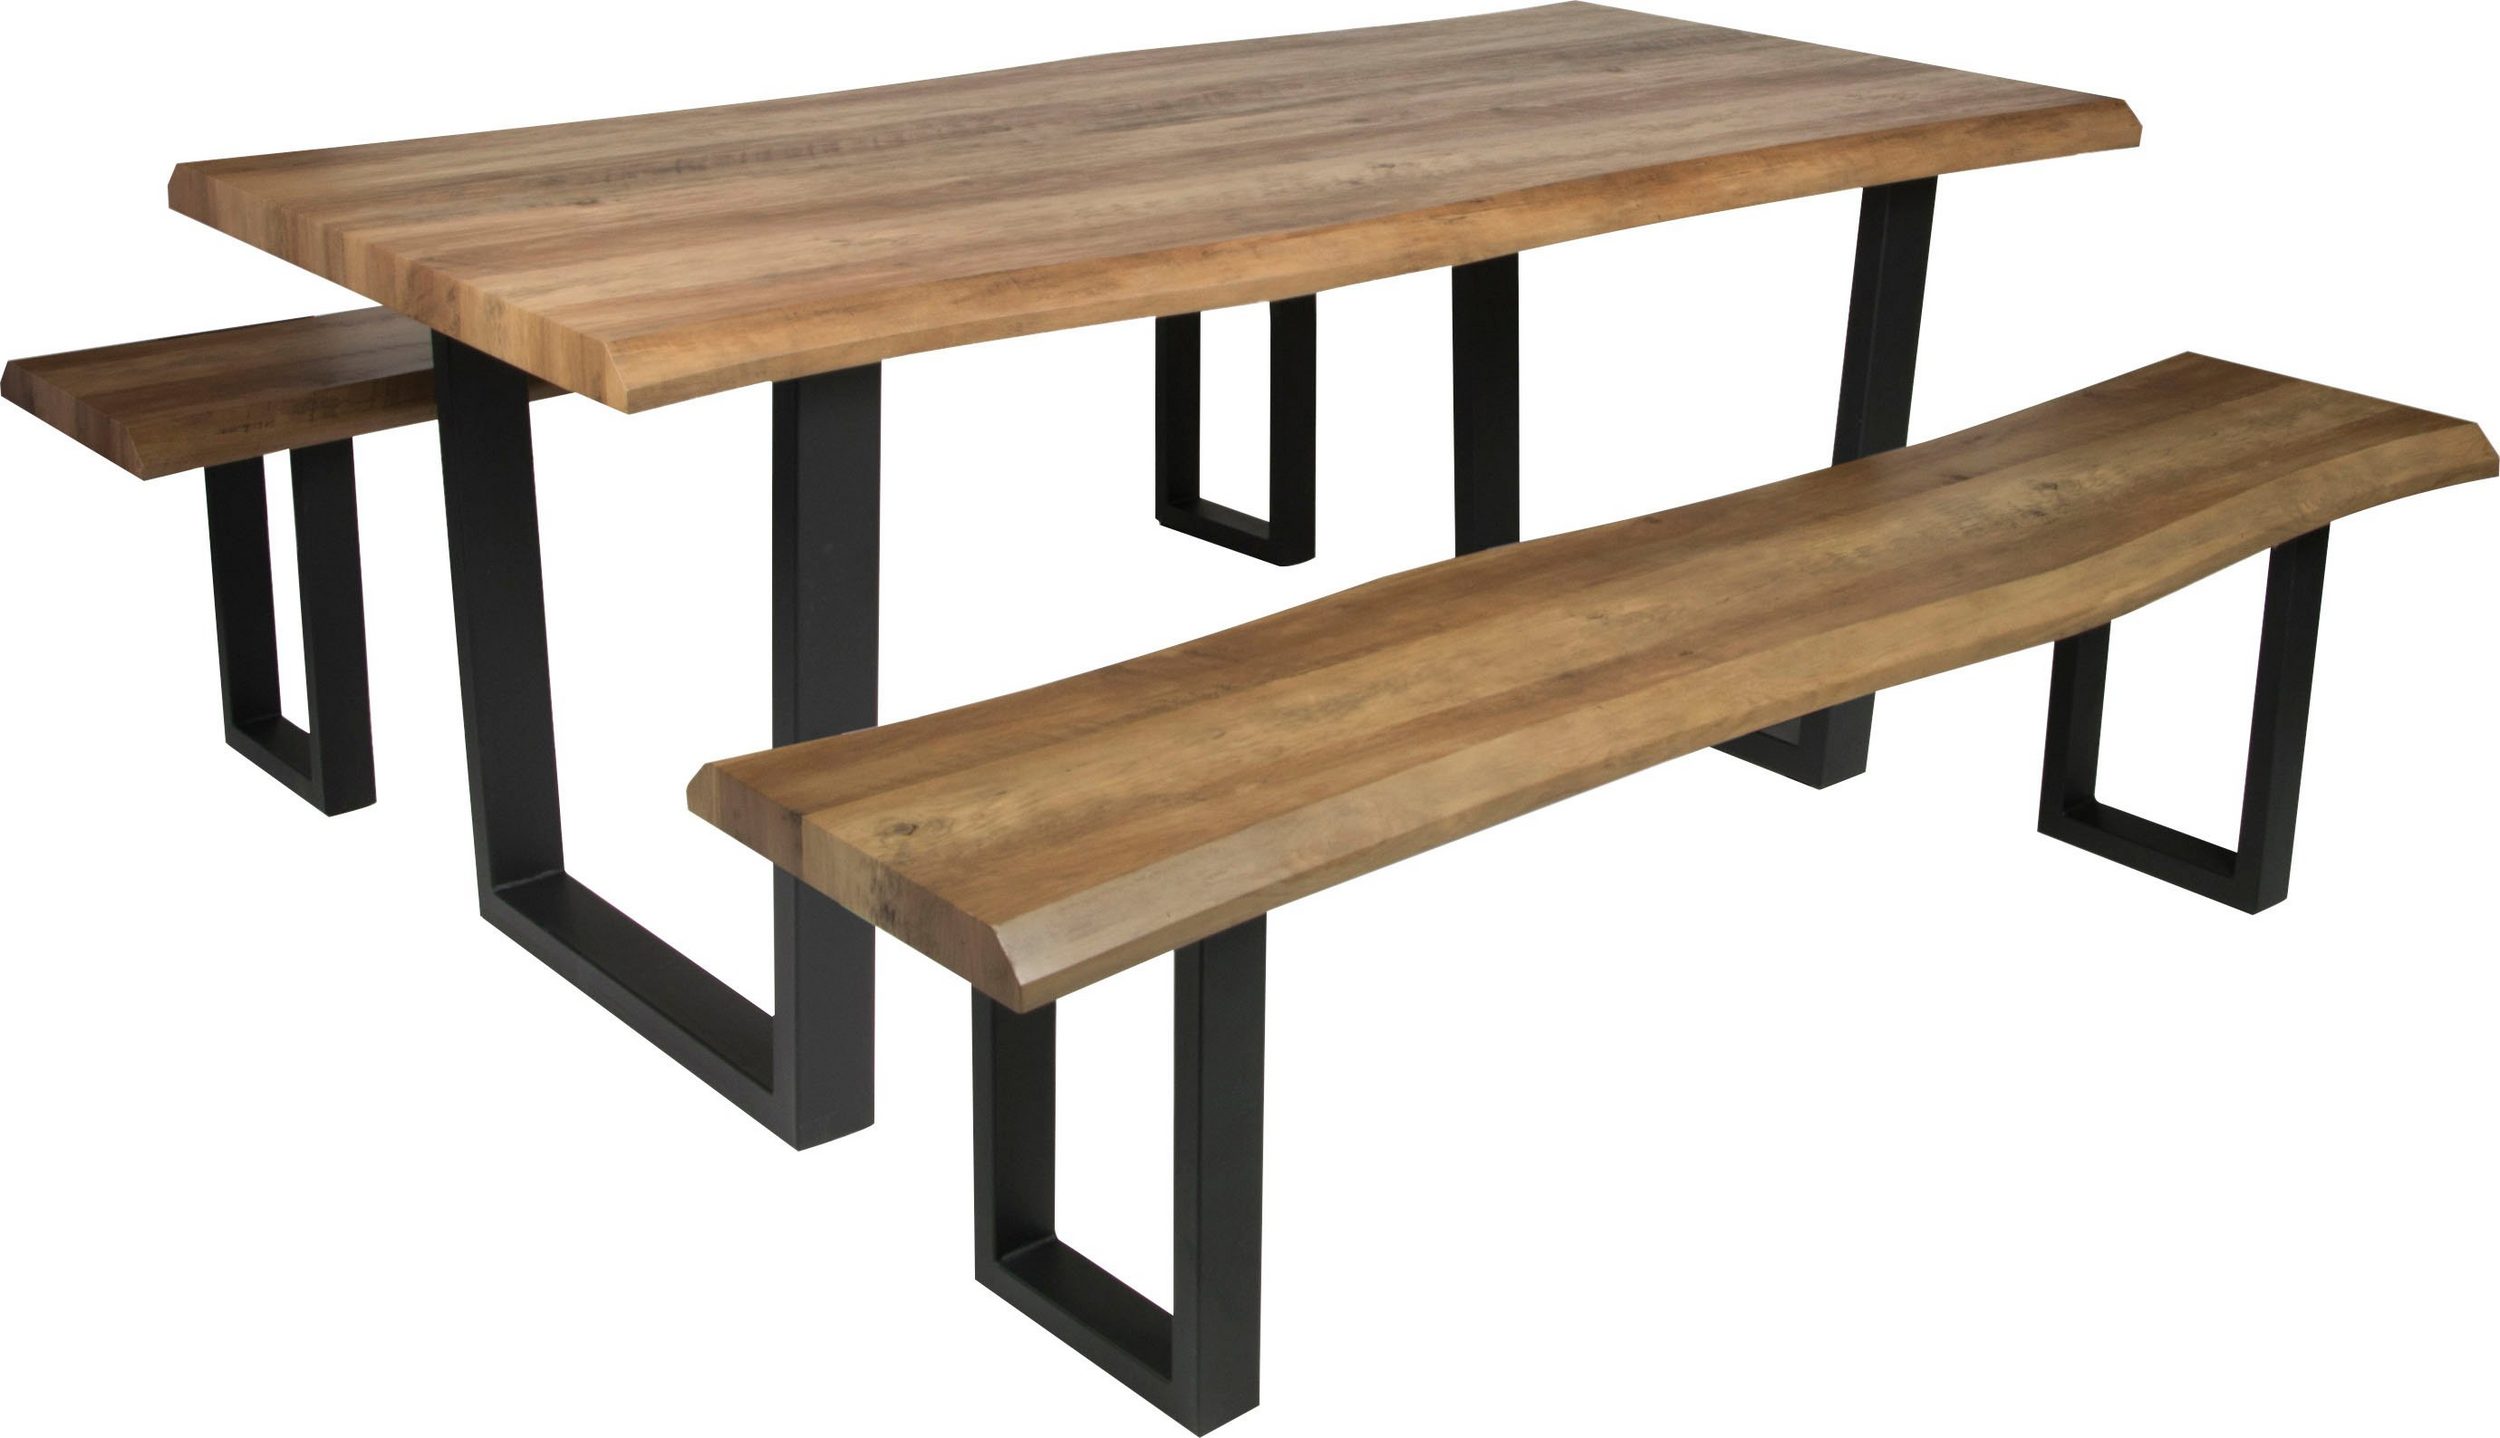 Hot Selling Live Edge Dining Set Paper veneer Bench BC-2101 Featured Image